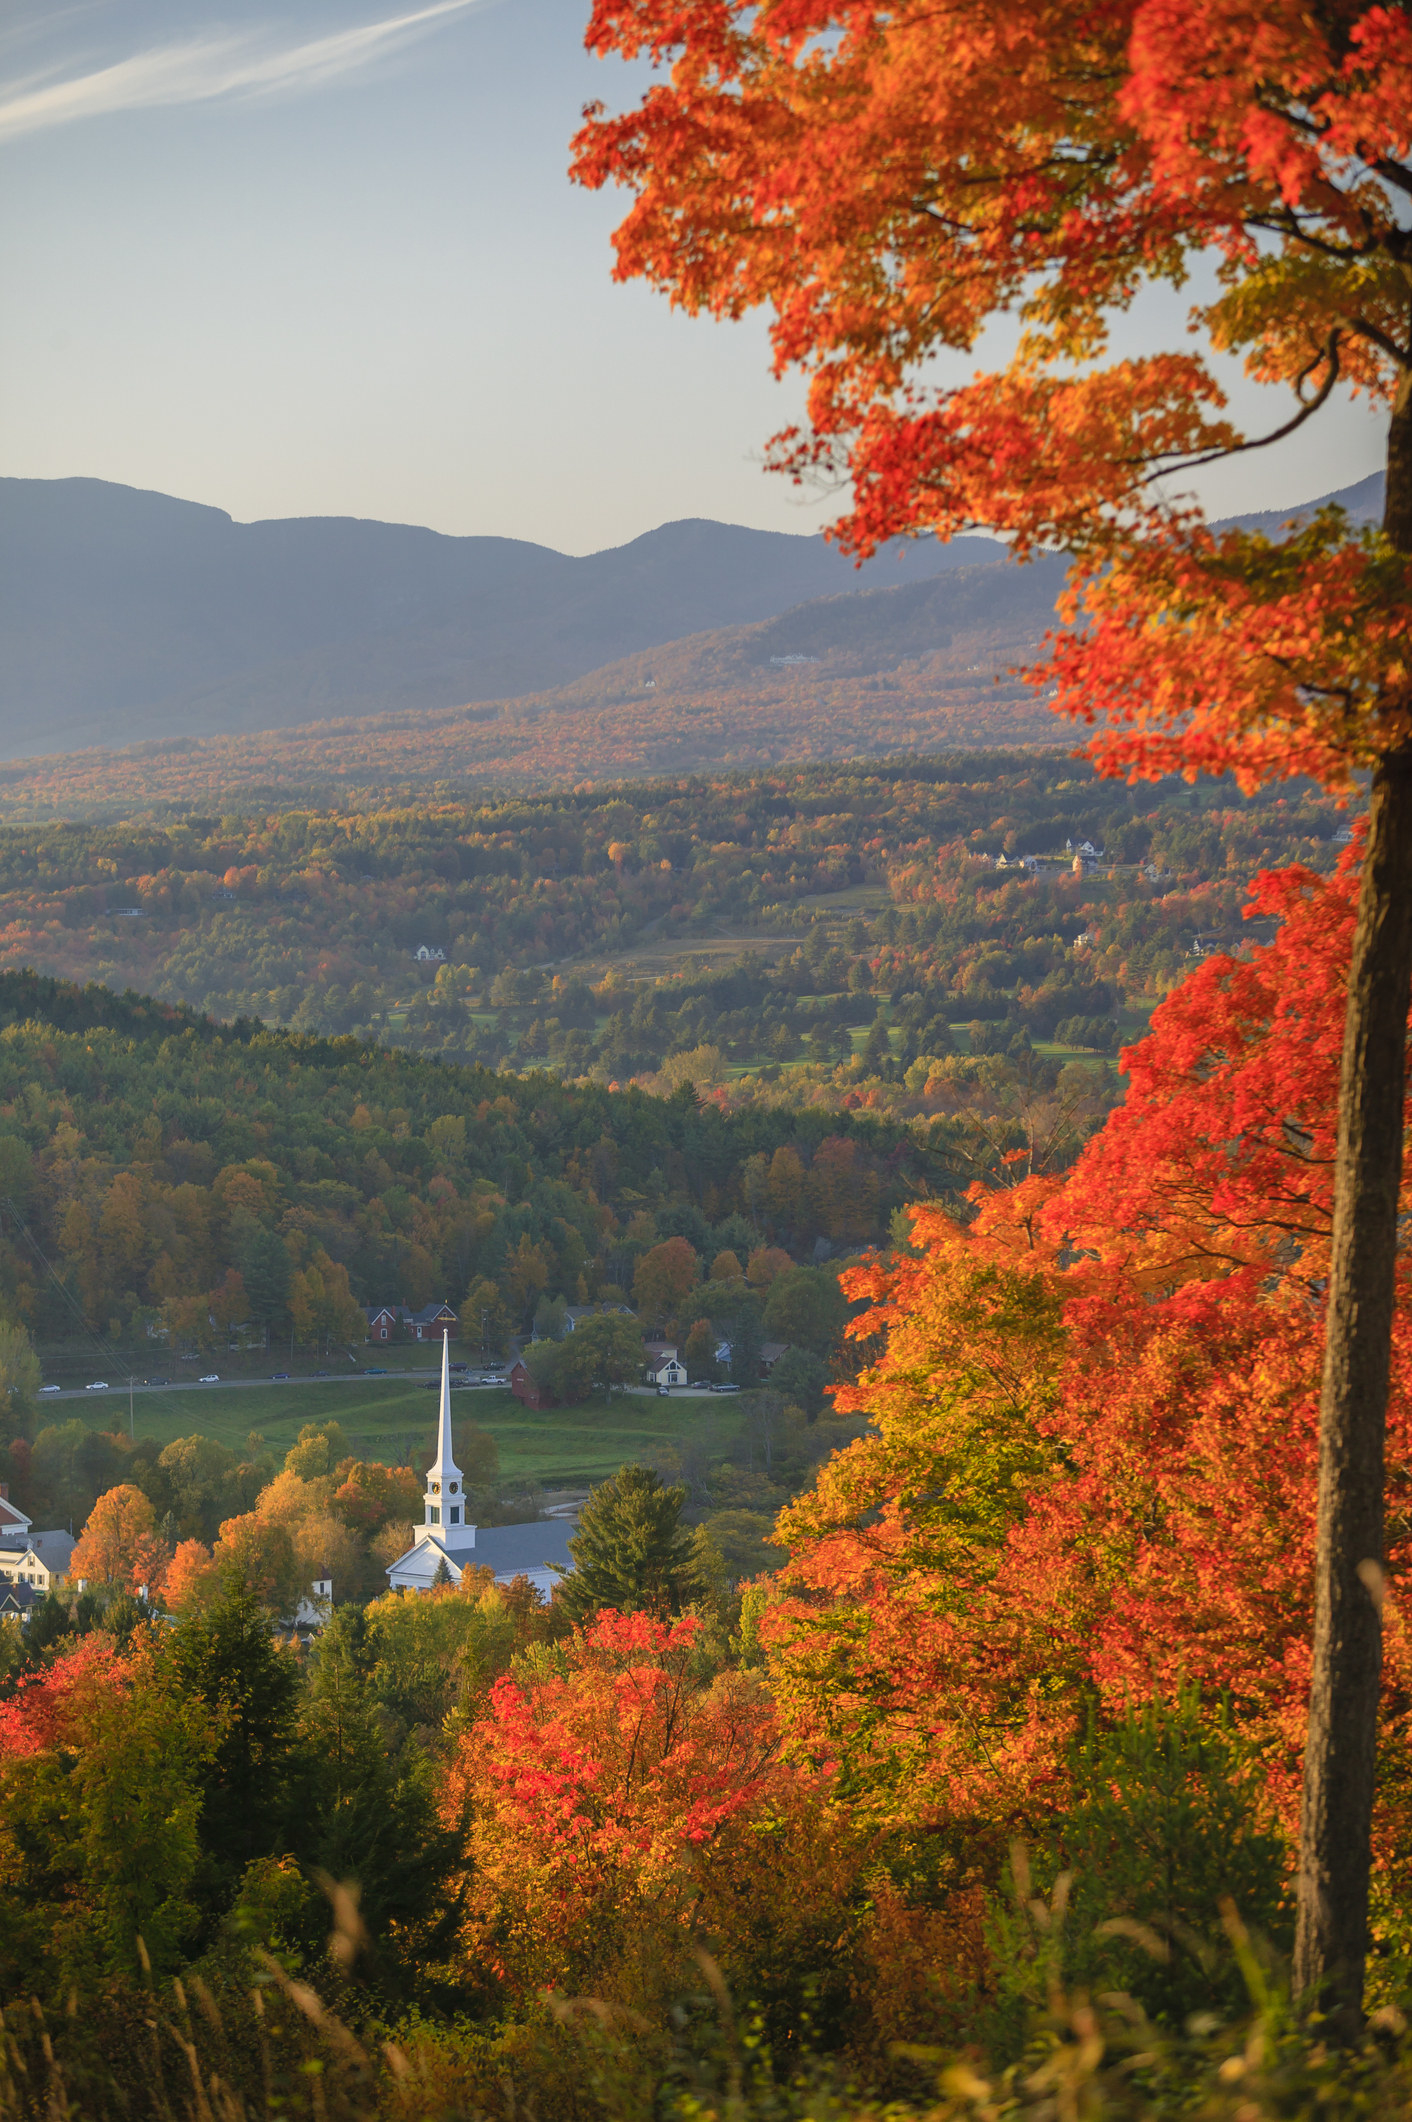 Fall foliage in a Vermont town.